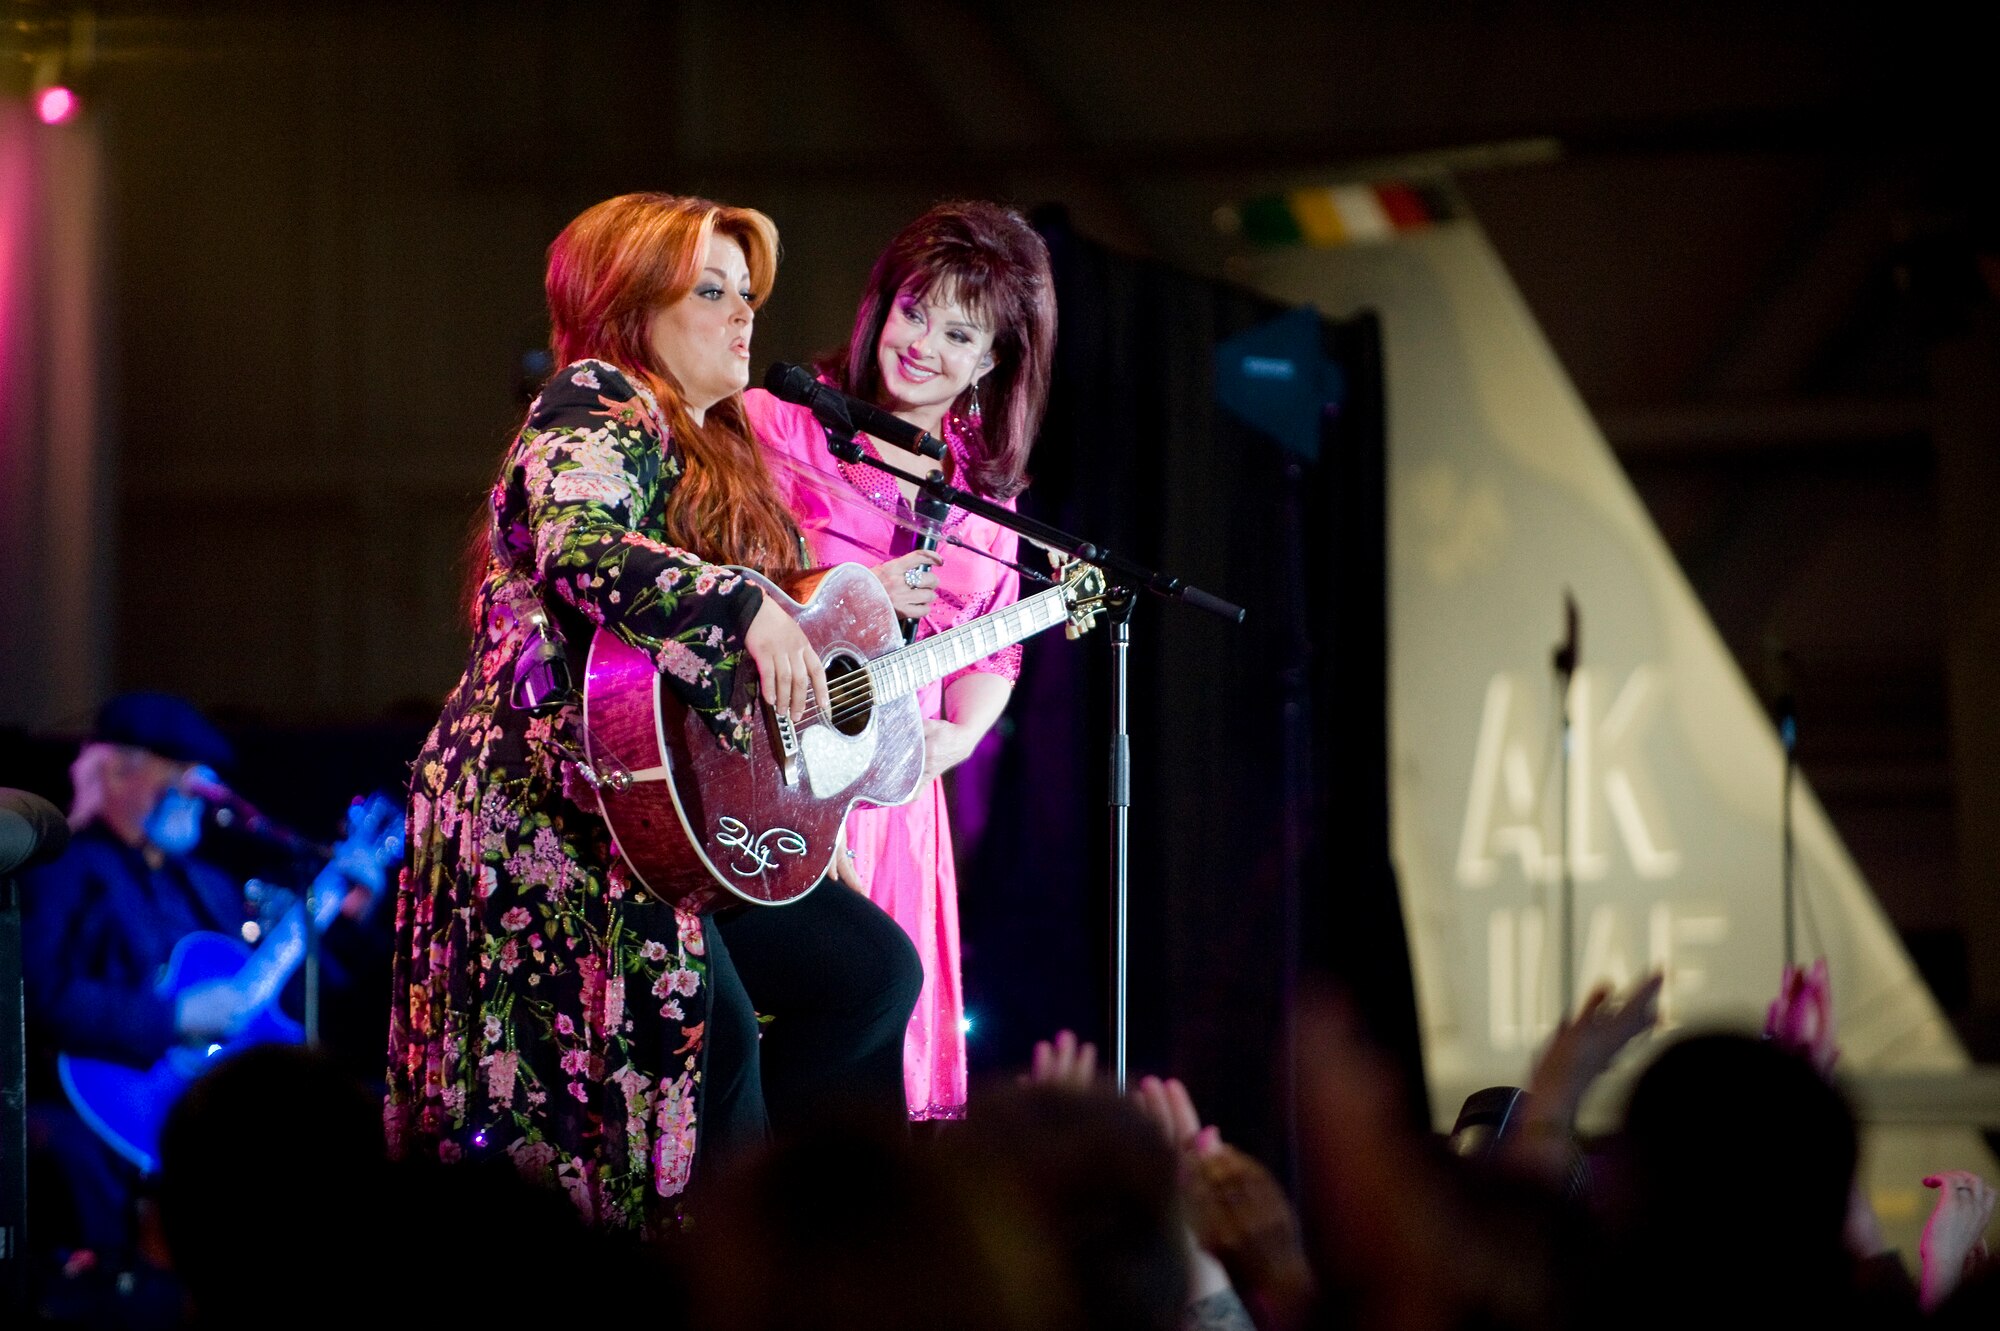 ELMENDORF AIR FORCE BASE, Alaska -- Wynonna and Naomi Judd sing together  to the military and Alaska crowd at the "Alaska's Concert for the Military" concert June 27 at Hangar 2. The concert was a part of Alaska's 50 years of statehood celebration. (U.S. Air Force photo by Senior Airman Jonathan Steffen)